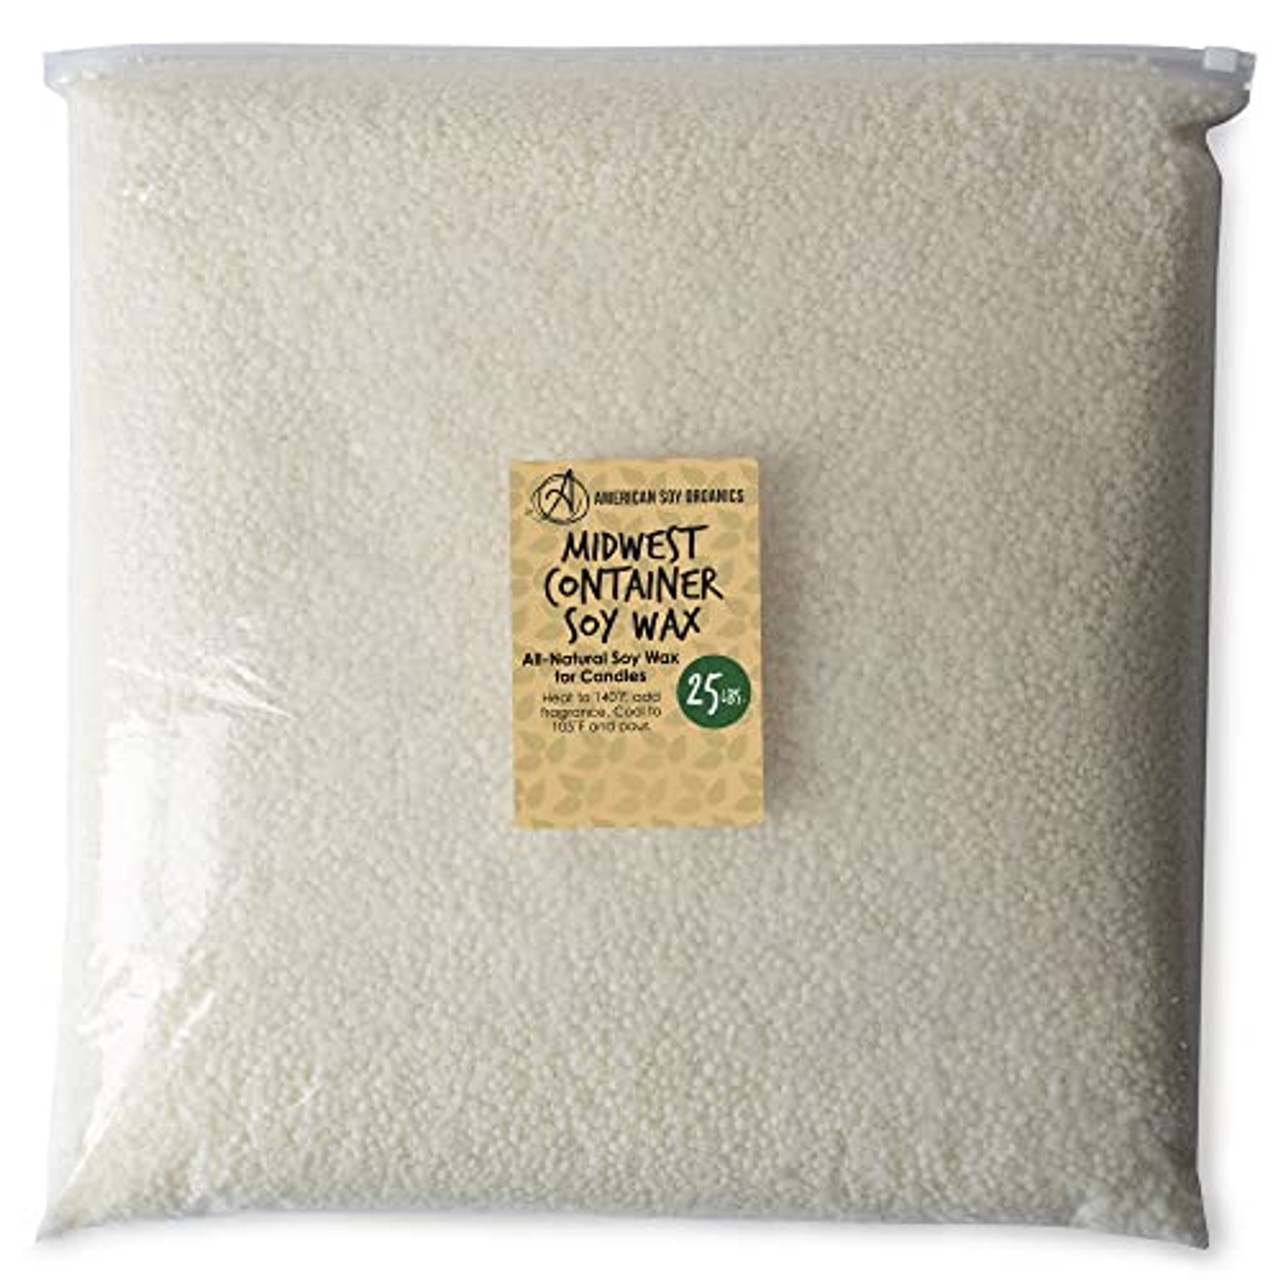 American Soy Organics - 100% Midwest Soy Container Wax Beads for